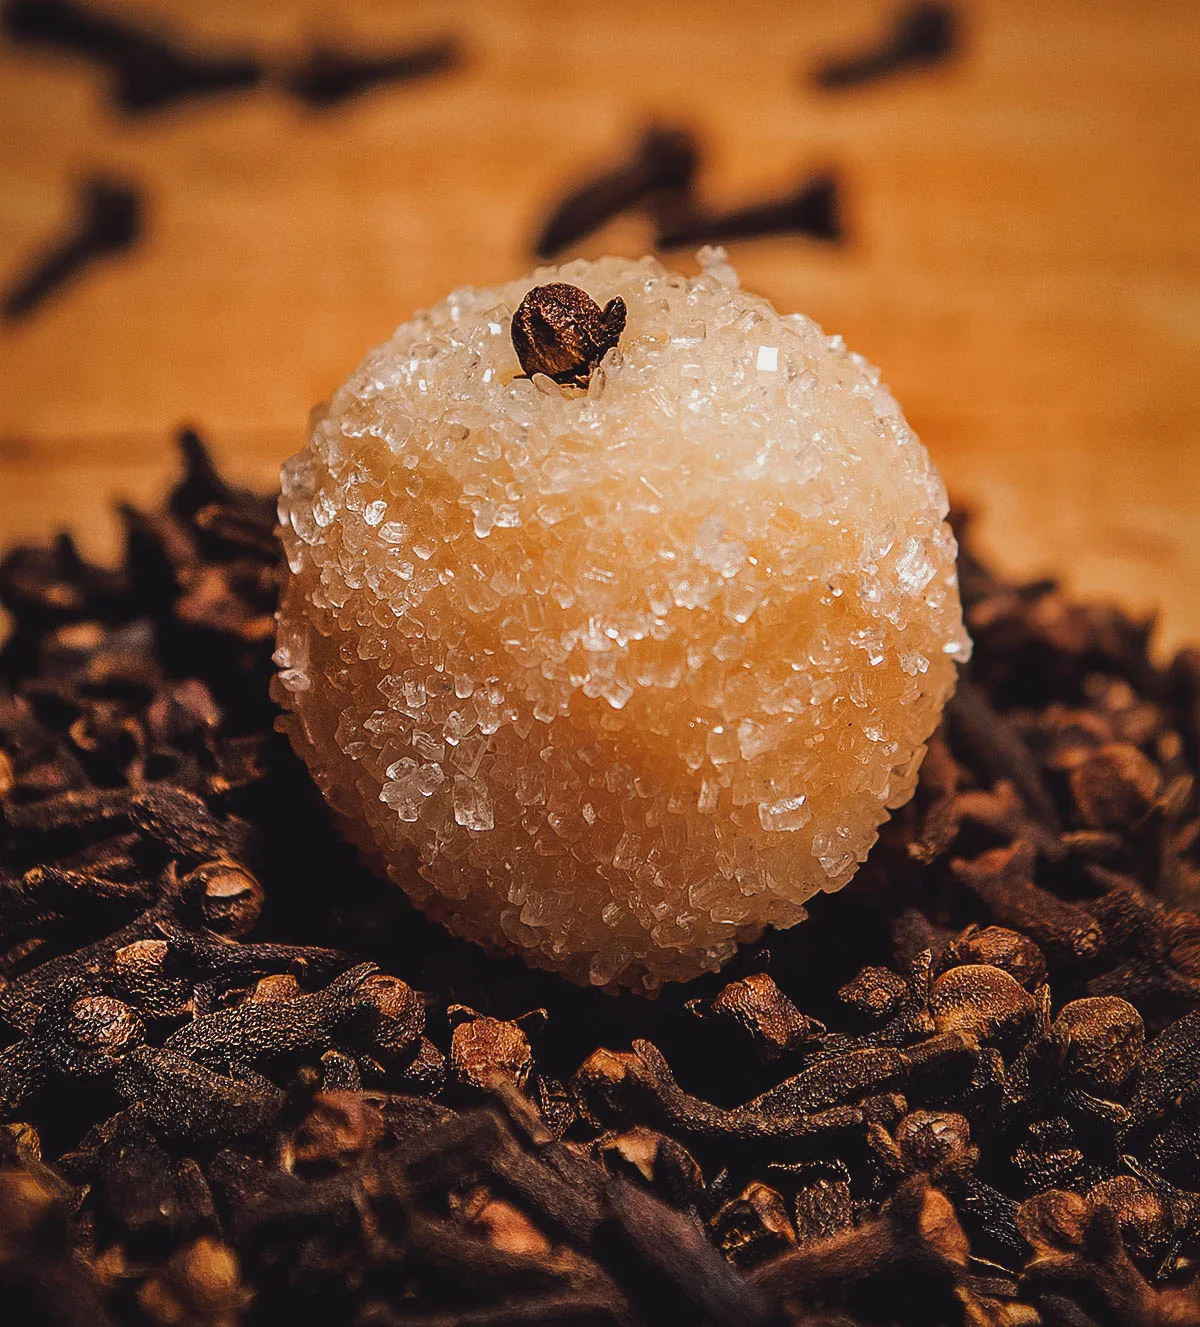 Beijinho de coco, a popular Brazilian sweet treat made with grated coconut and condensed milk